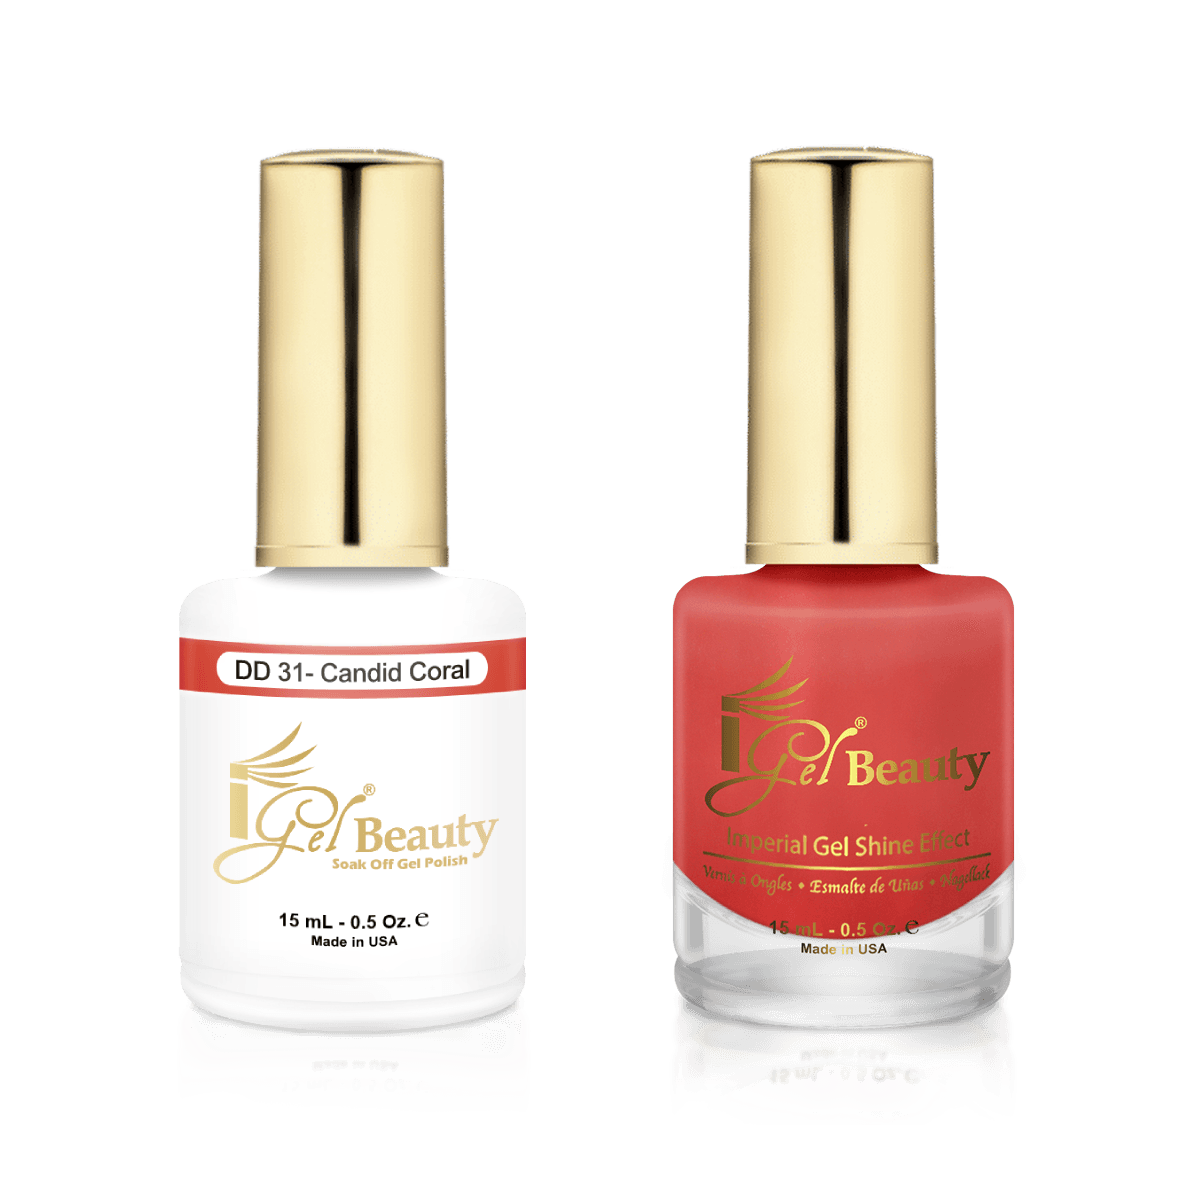 IGel Duo Gel Polish + Matching Nail Lacquer DD 31 CANDID CORAL